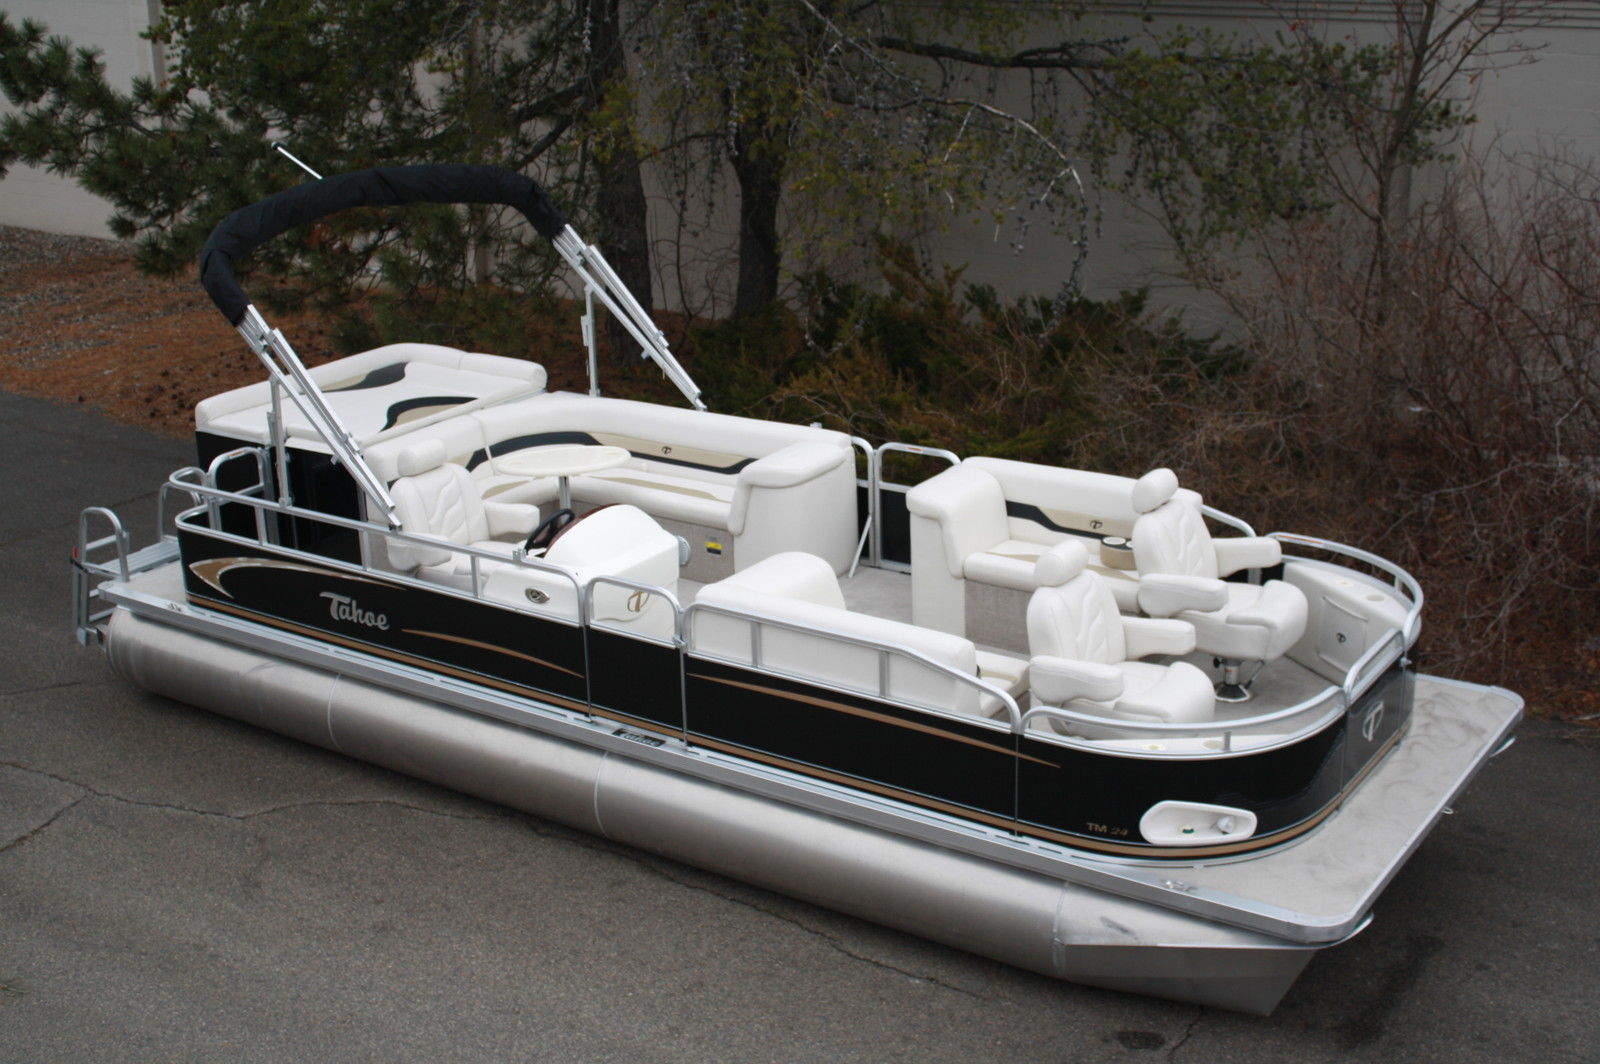 New 2014 ELRC TMLT 24 ft... boat, USA, for sale. 